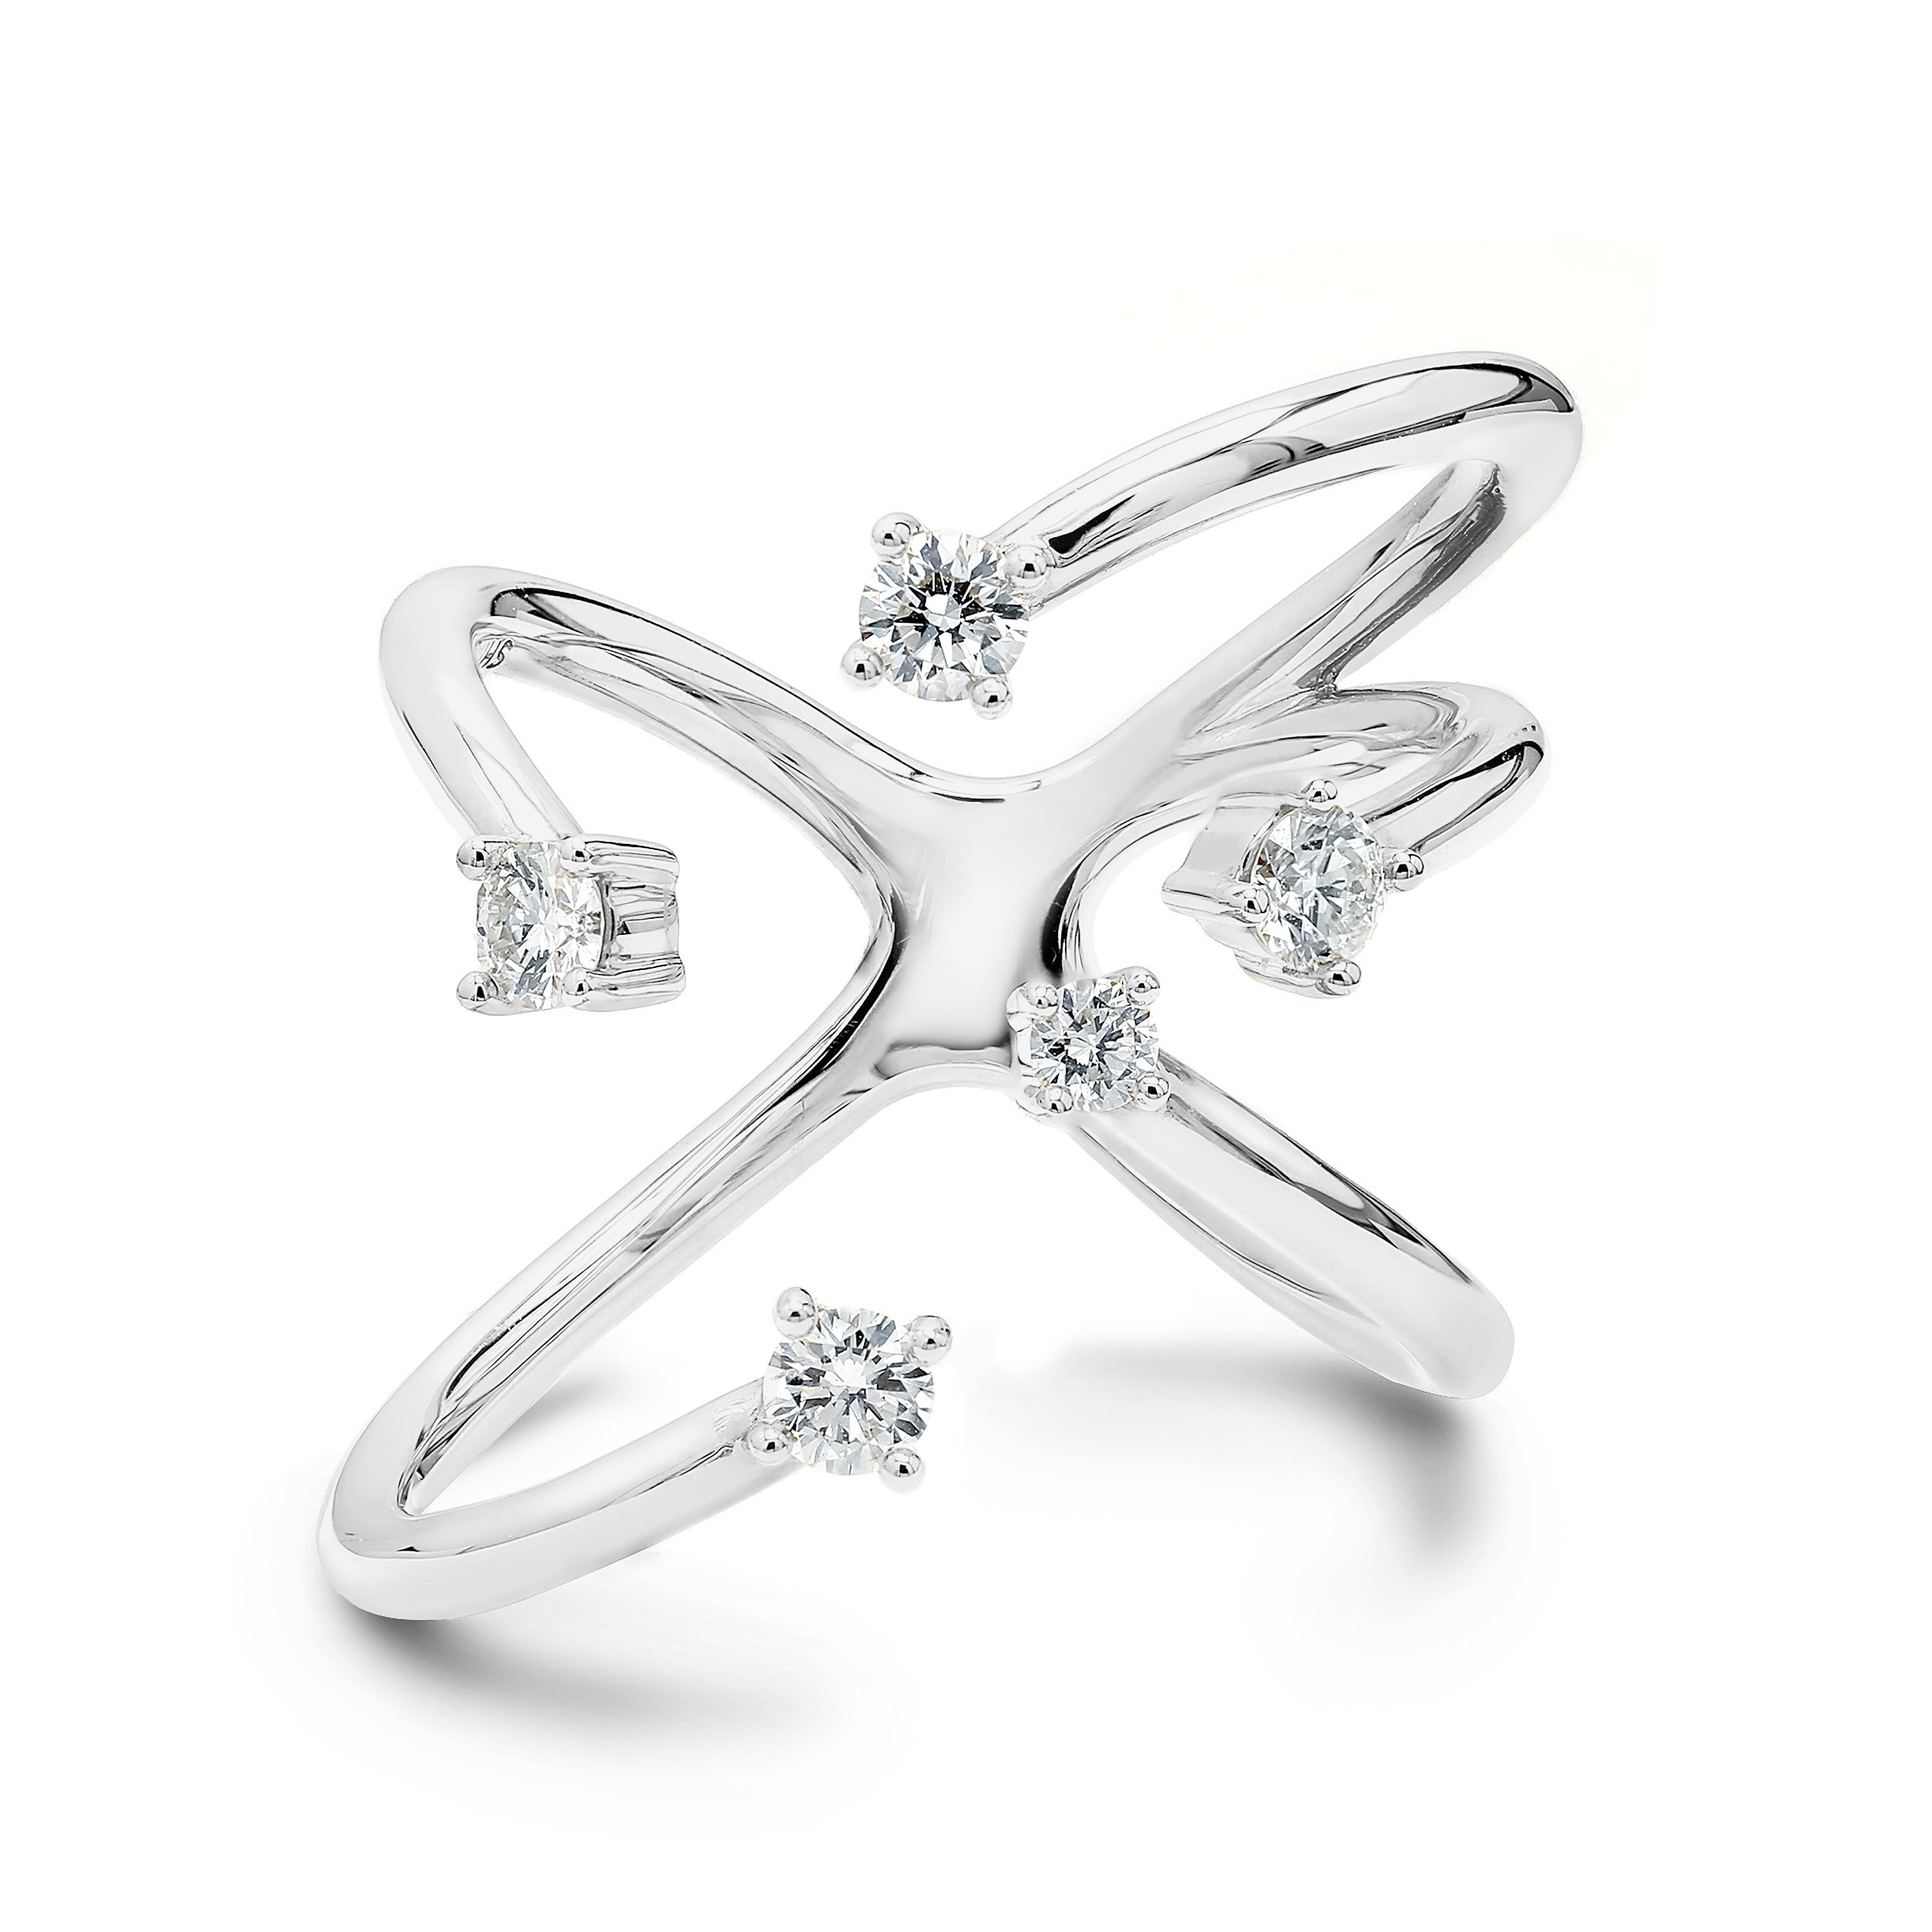 Shimansky - Southern Cross Large Diamond Ring Crafted in 18K White Gold